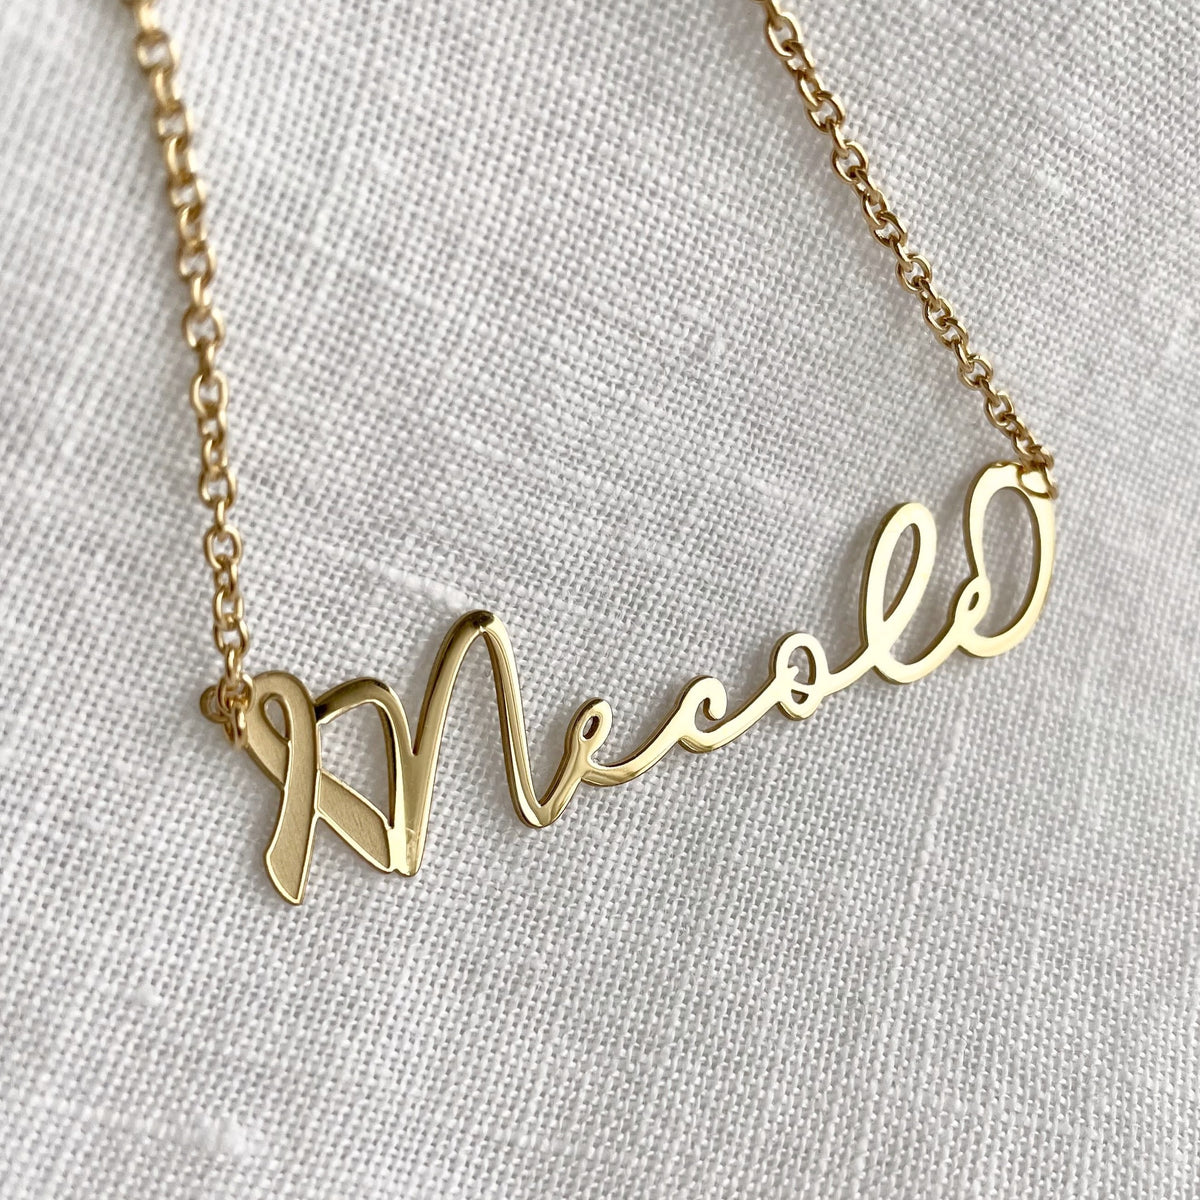 Breast Cancer Ribbon Personalized Name Necklace( 18k Gold Plated Sterling Silver, & Rose Gold Plated Sterling Silver, and Sterling Silver ( Small, Medium, & Large Sizes Available)